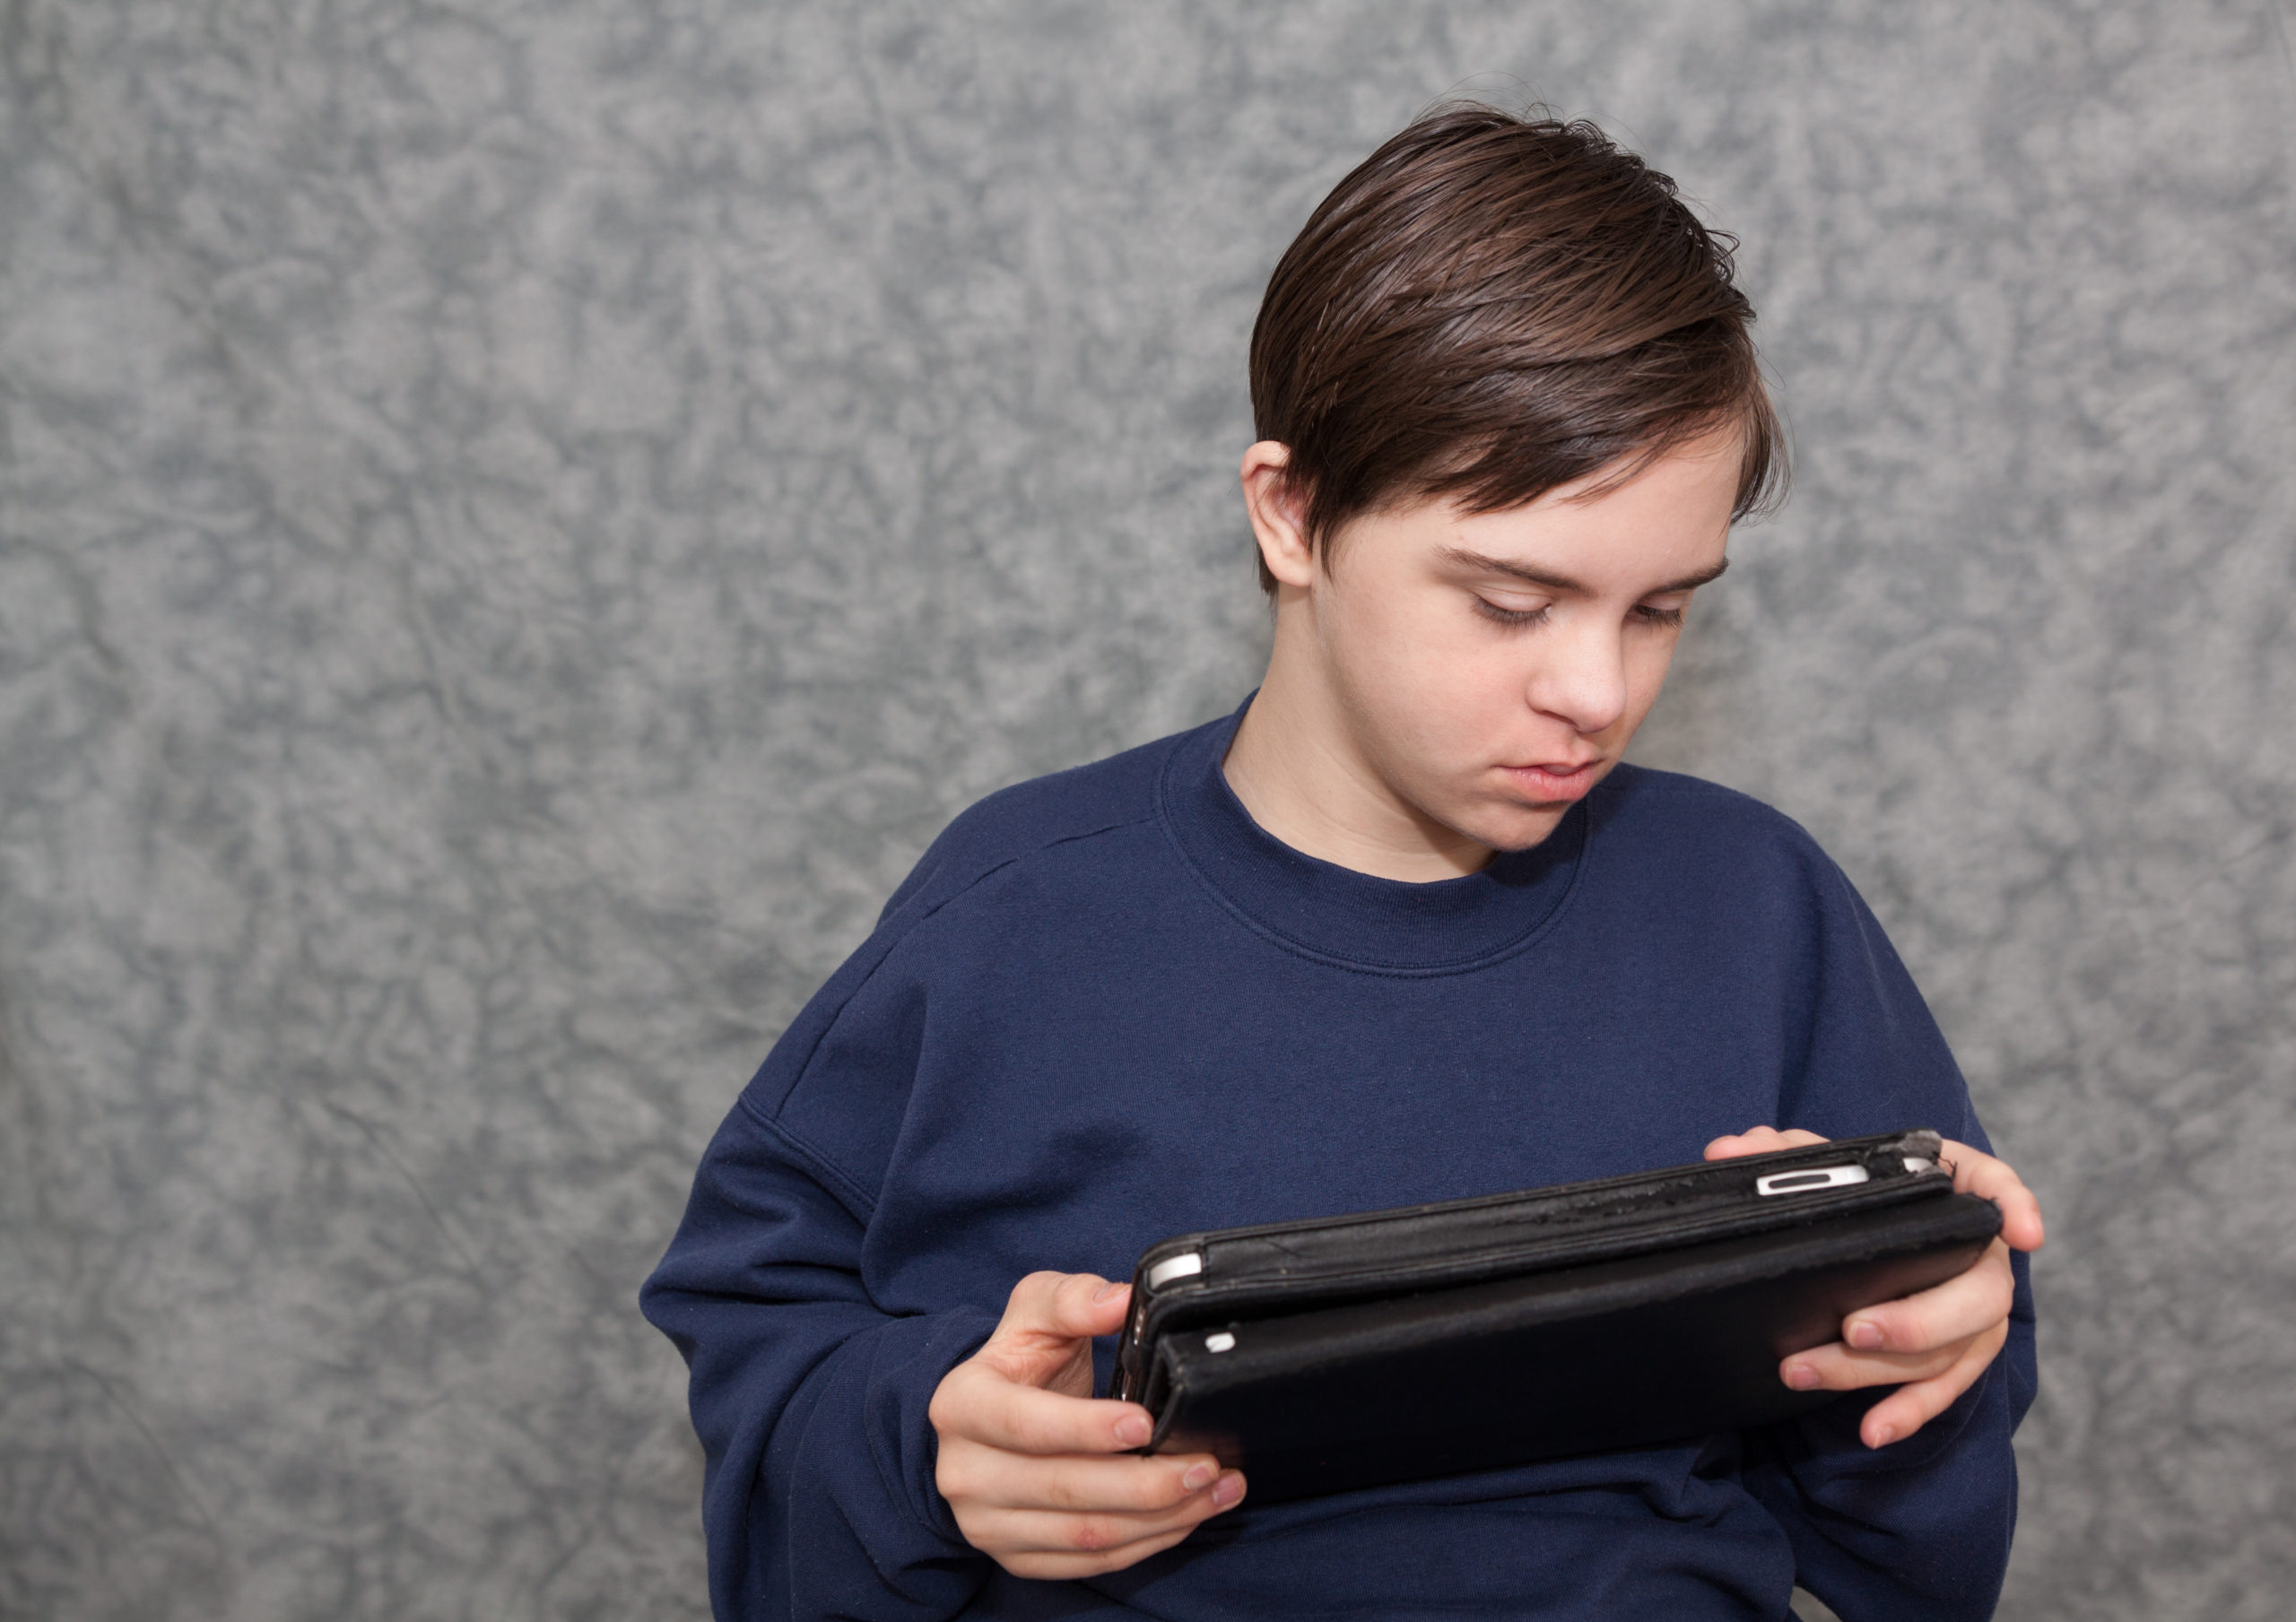 Young boy using assistive technology